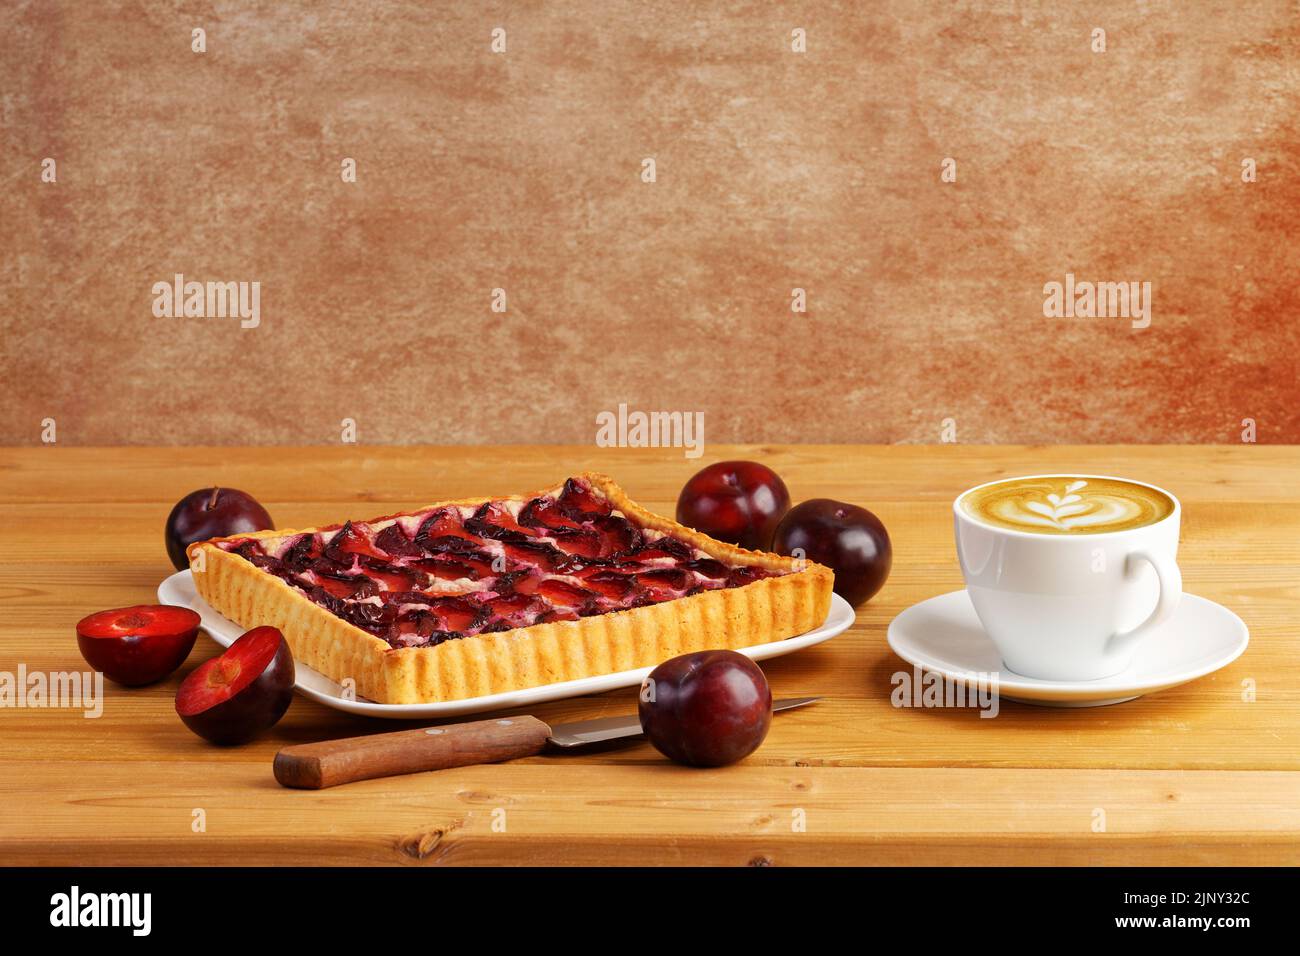 Homemade plum cake and cup of coffee cappuccino on wooden table. Copyspace. Stock Photo